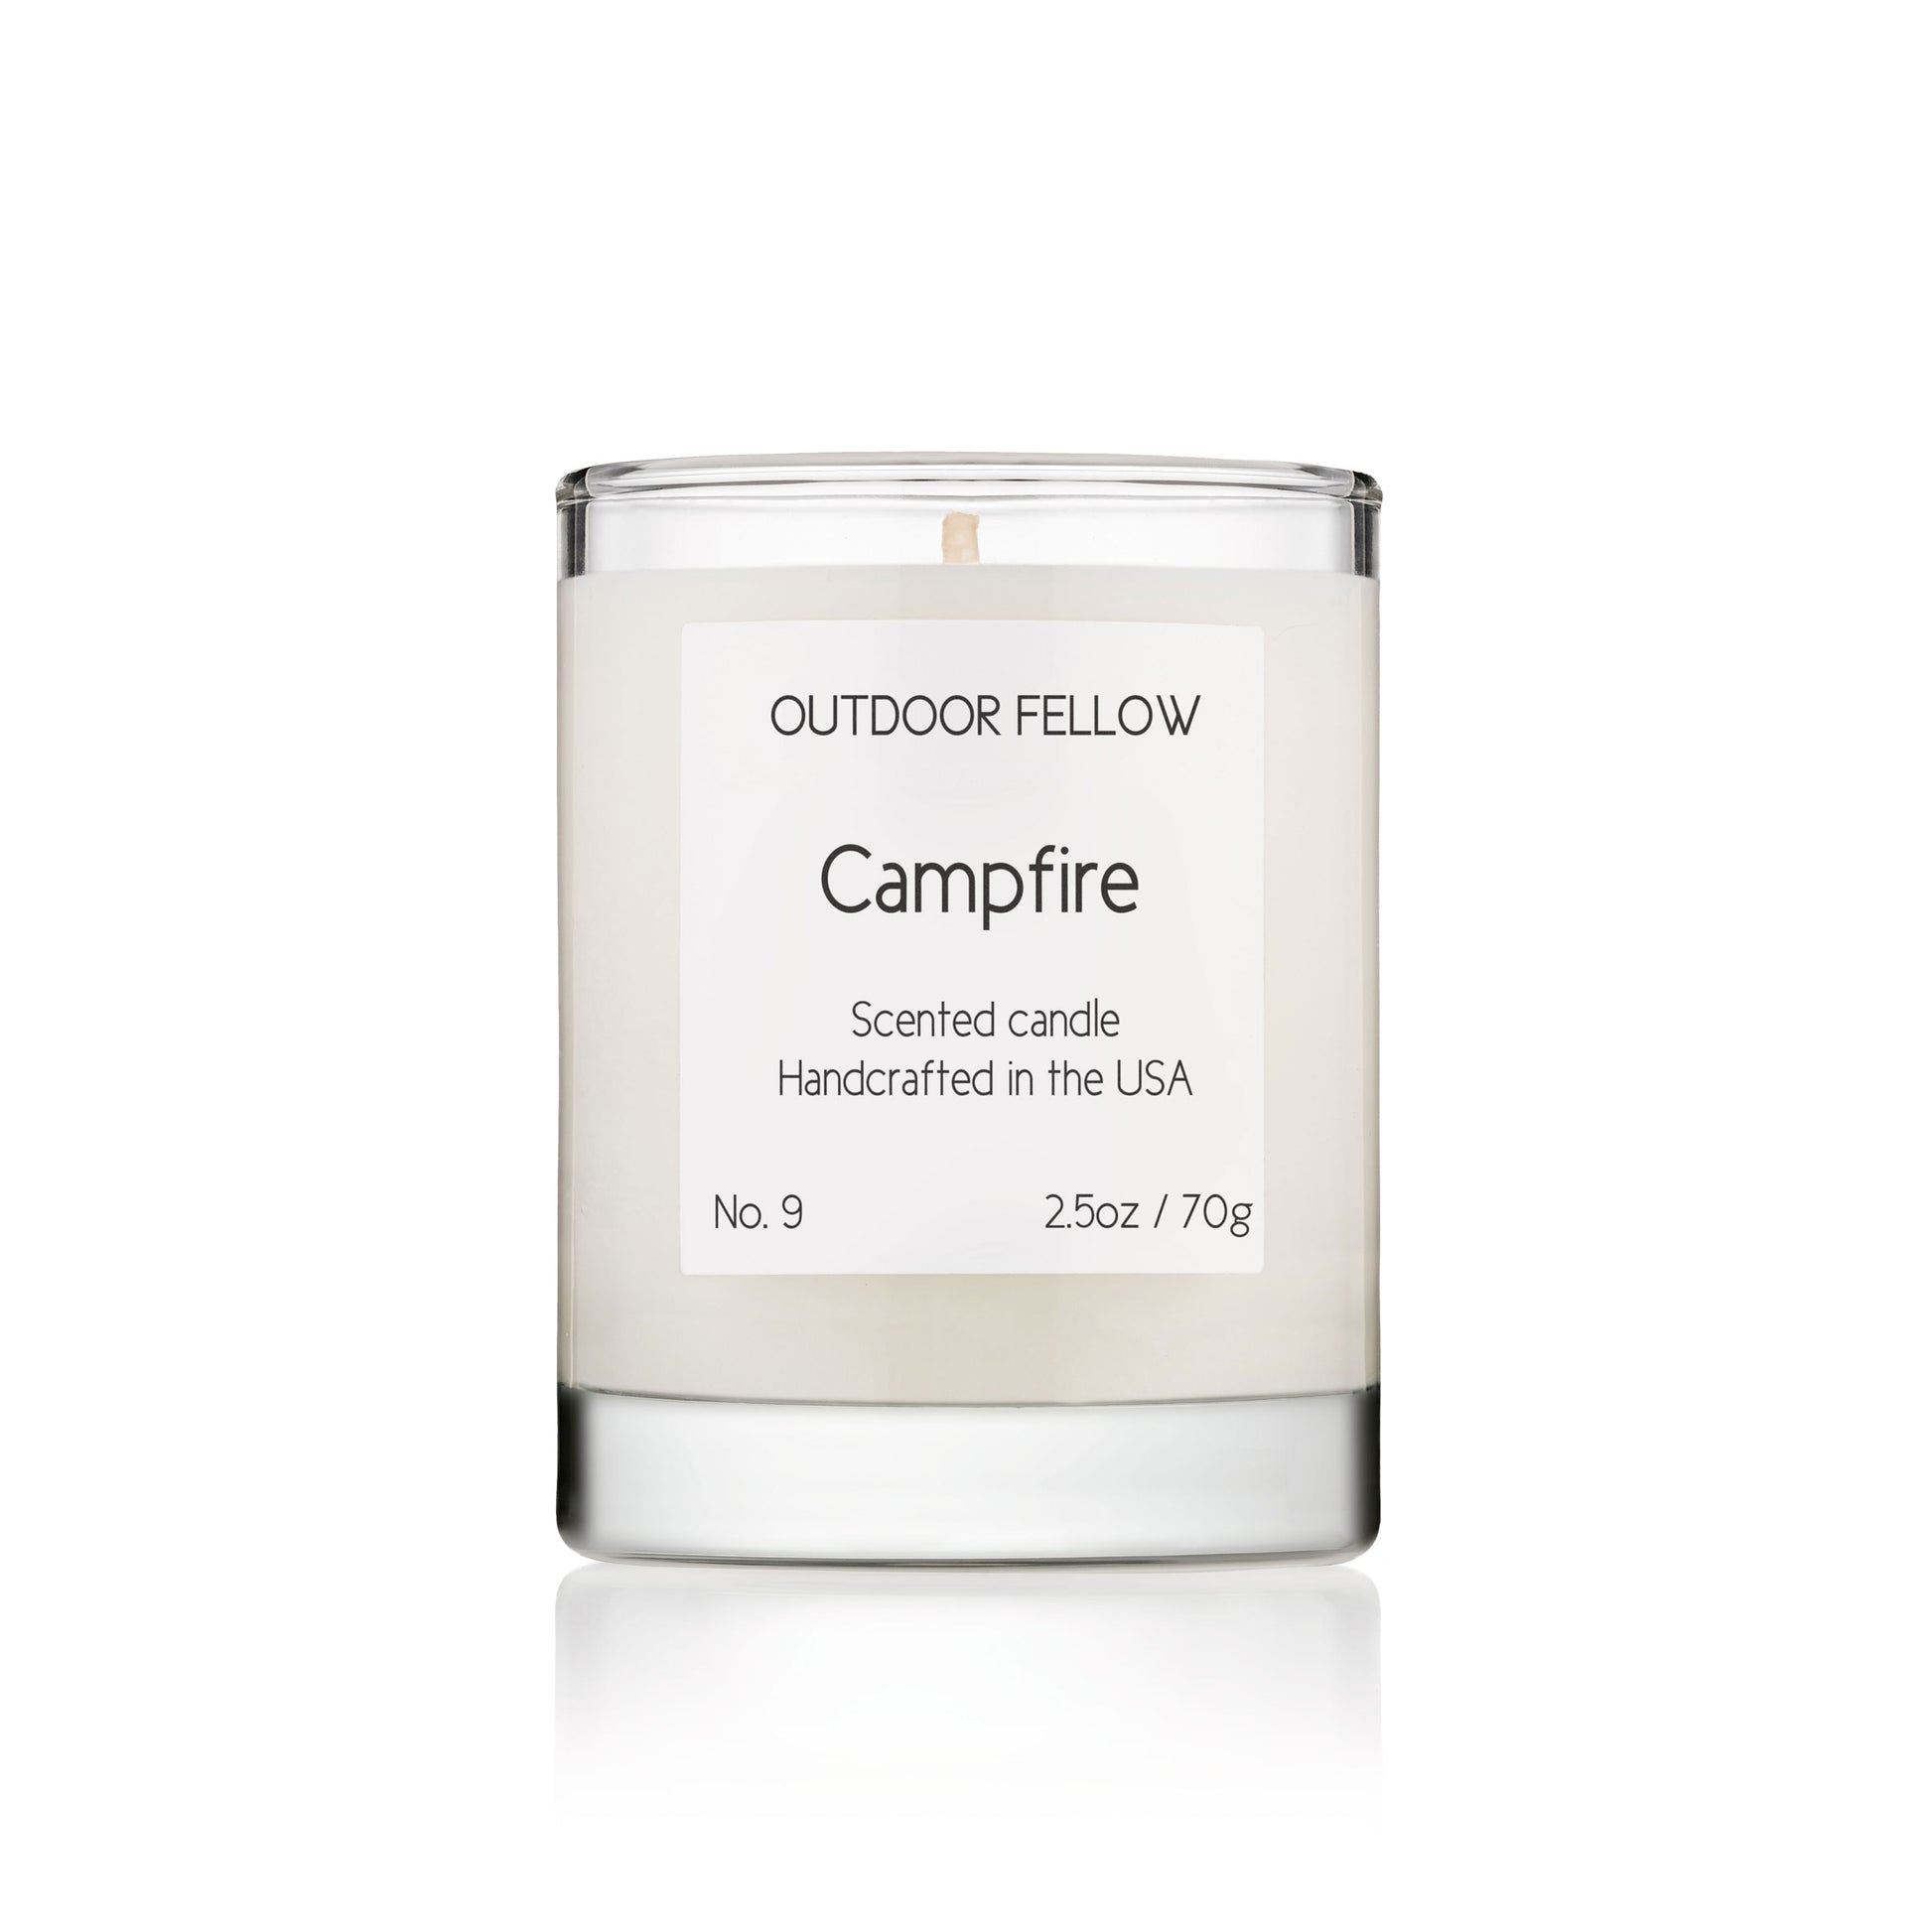 2.5oz Campfire Scented Candle